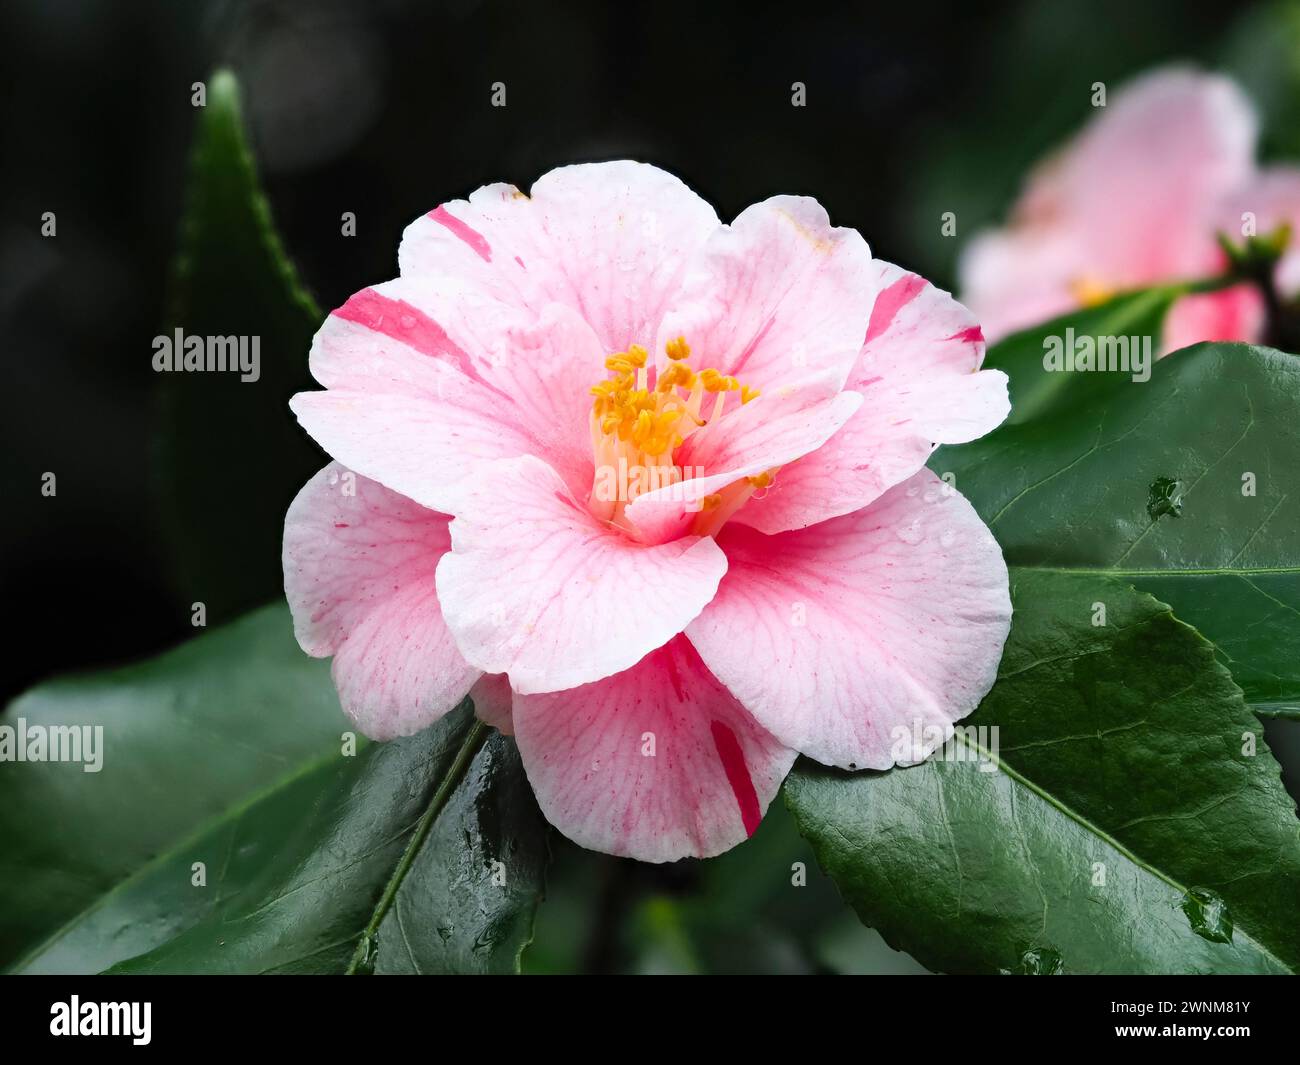 Pink and red streaked white flower of the hardy evergreen shrub, Camellia japonica 'Tricolor' blooming in early spring Stock Photo